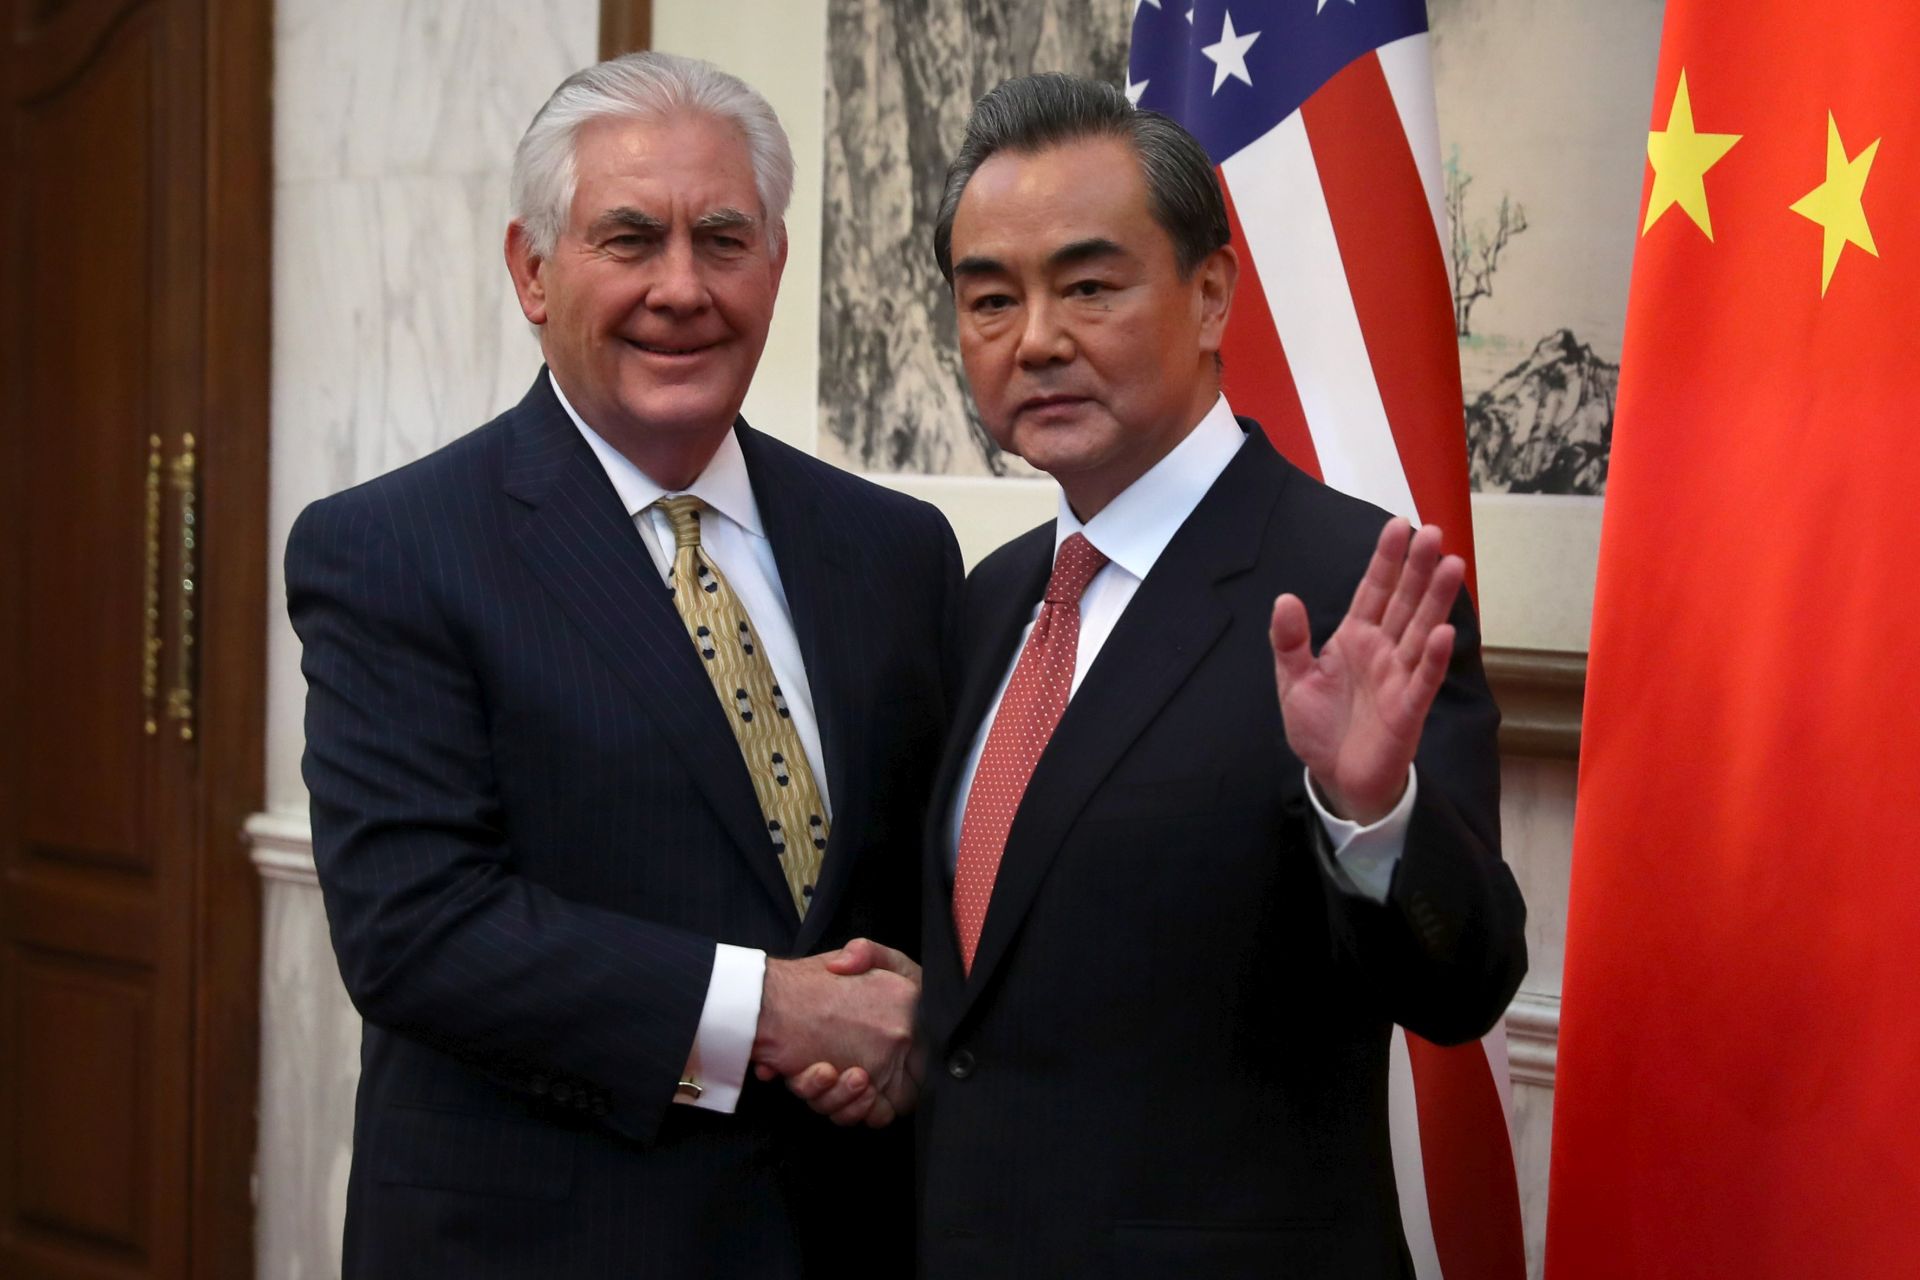 epa05855535 US Secretary of State Rex Tillerson (L) shakes hands with Chinese Foreign Minister Wang Yi (R) as he arrives for a bilateral meeting at the Diaoyutai State Guesthouse in Beijing, China, 18 March 2017. Tillerson is in China as part of his three-country trip through the Asia-Pacific region.  EPA/MARK SCHIEFELBEIN / POOL